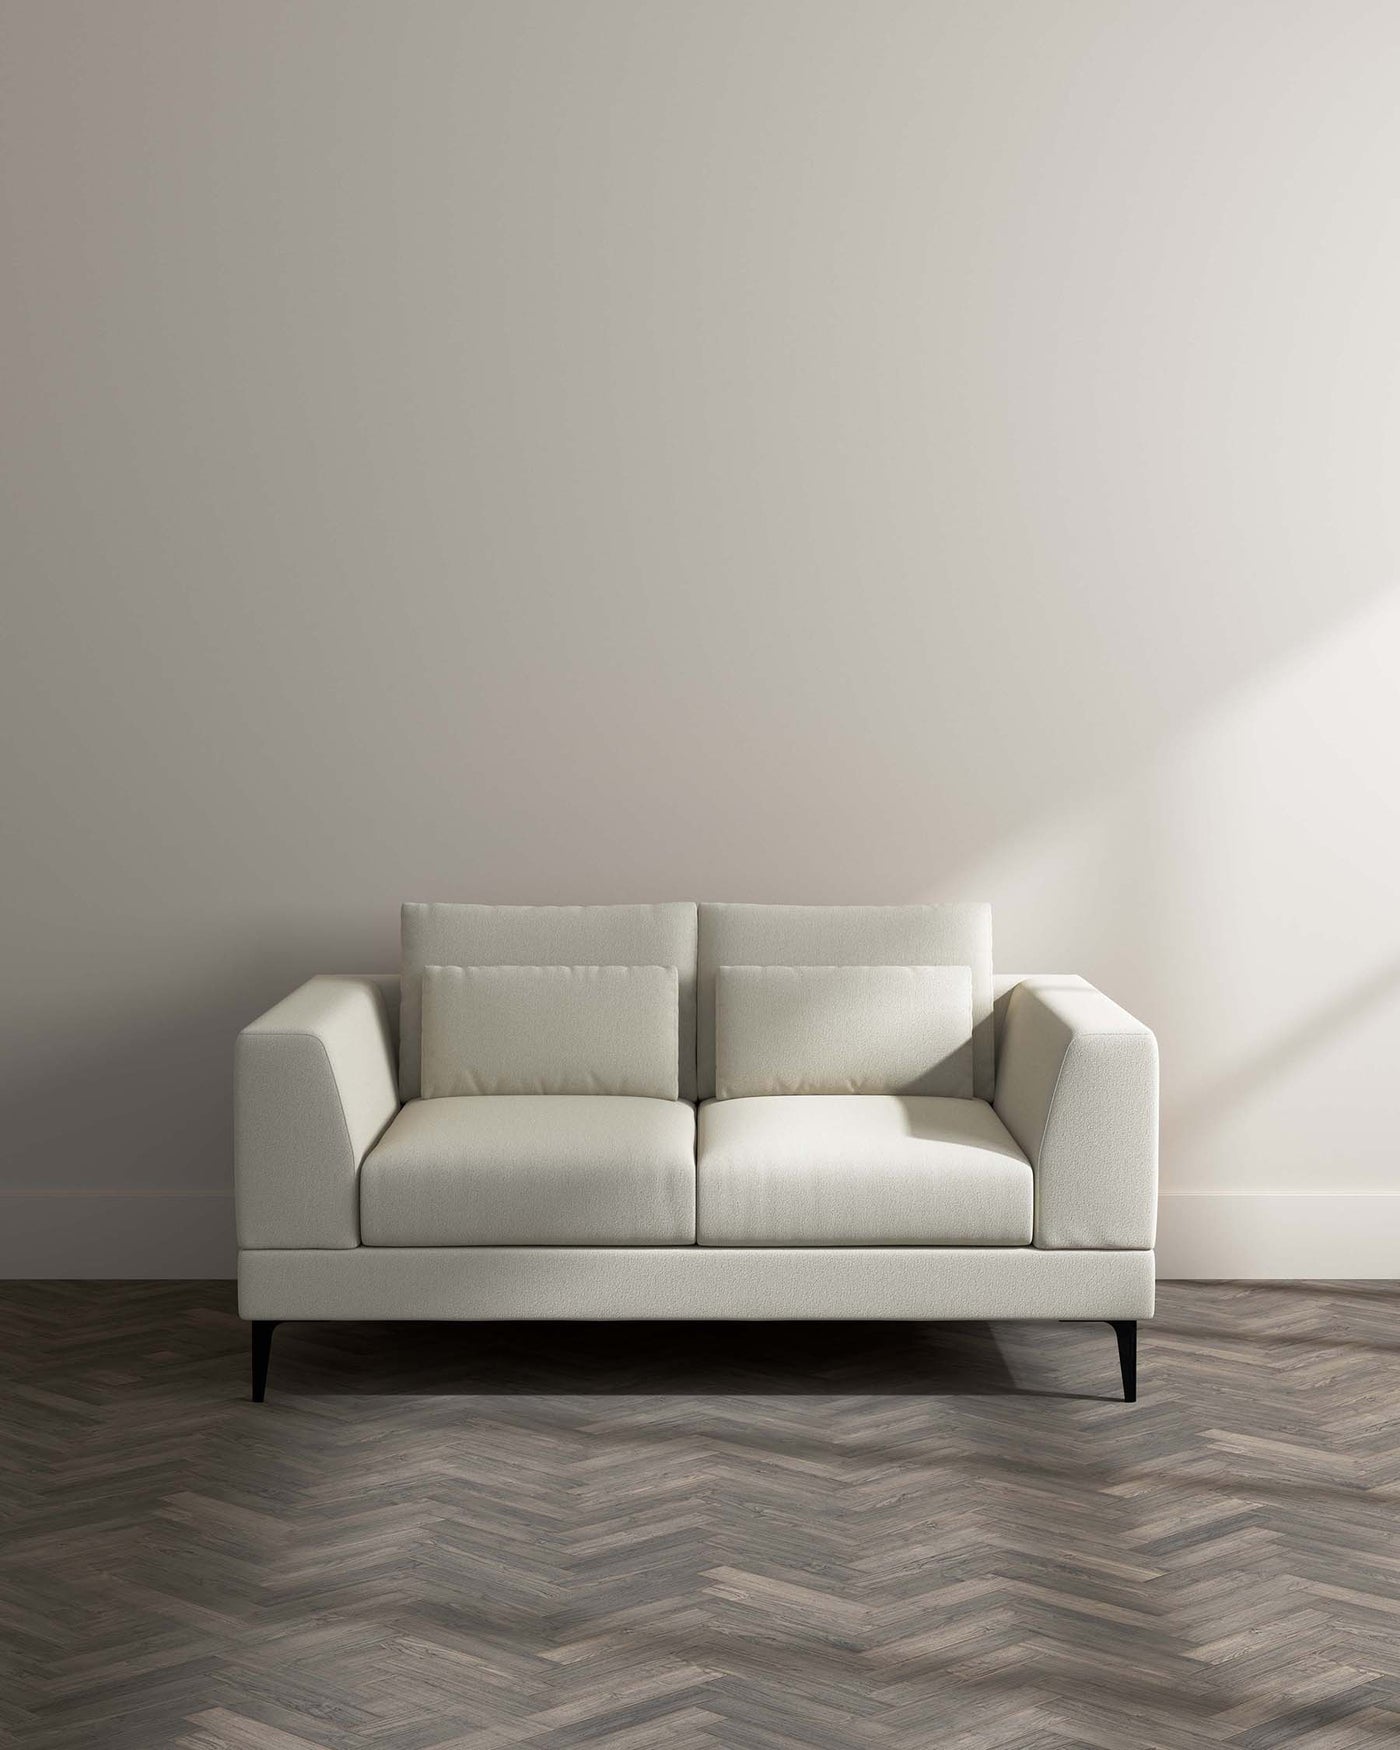 Modern light-coloured fabric sofa with clean lines, featuring plush back cushions and a tailored silhouette, set against a neutral wall on a herringbone-patterned wood floor.